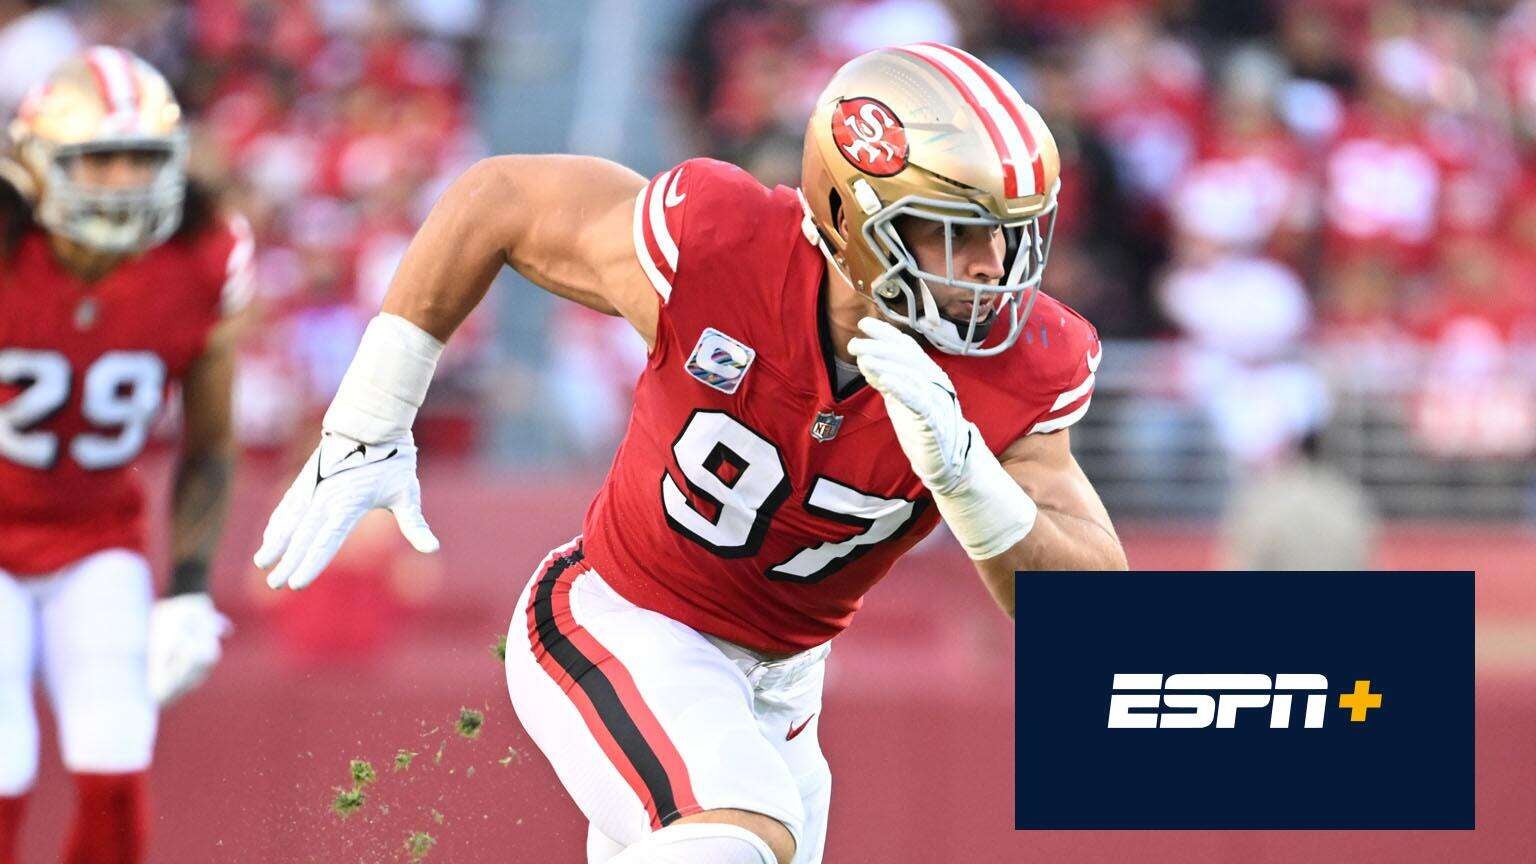 Can I Watch the 49ers Game on ESPN+? – The Streamable